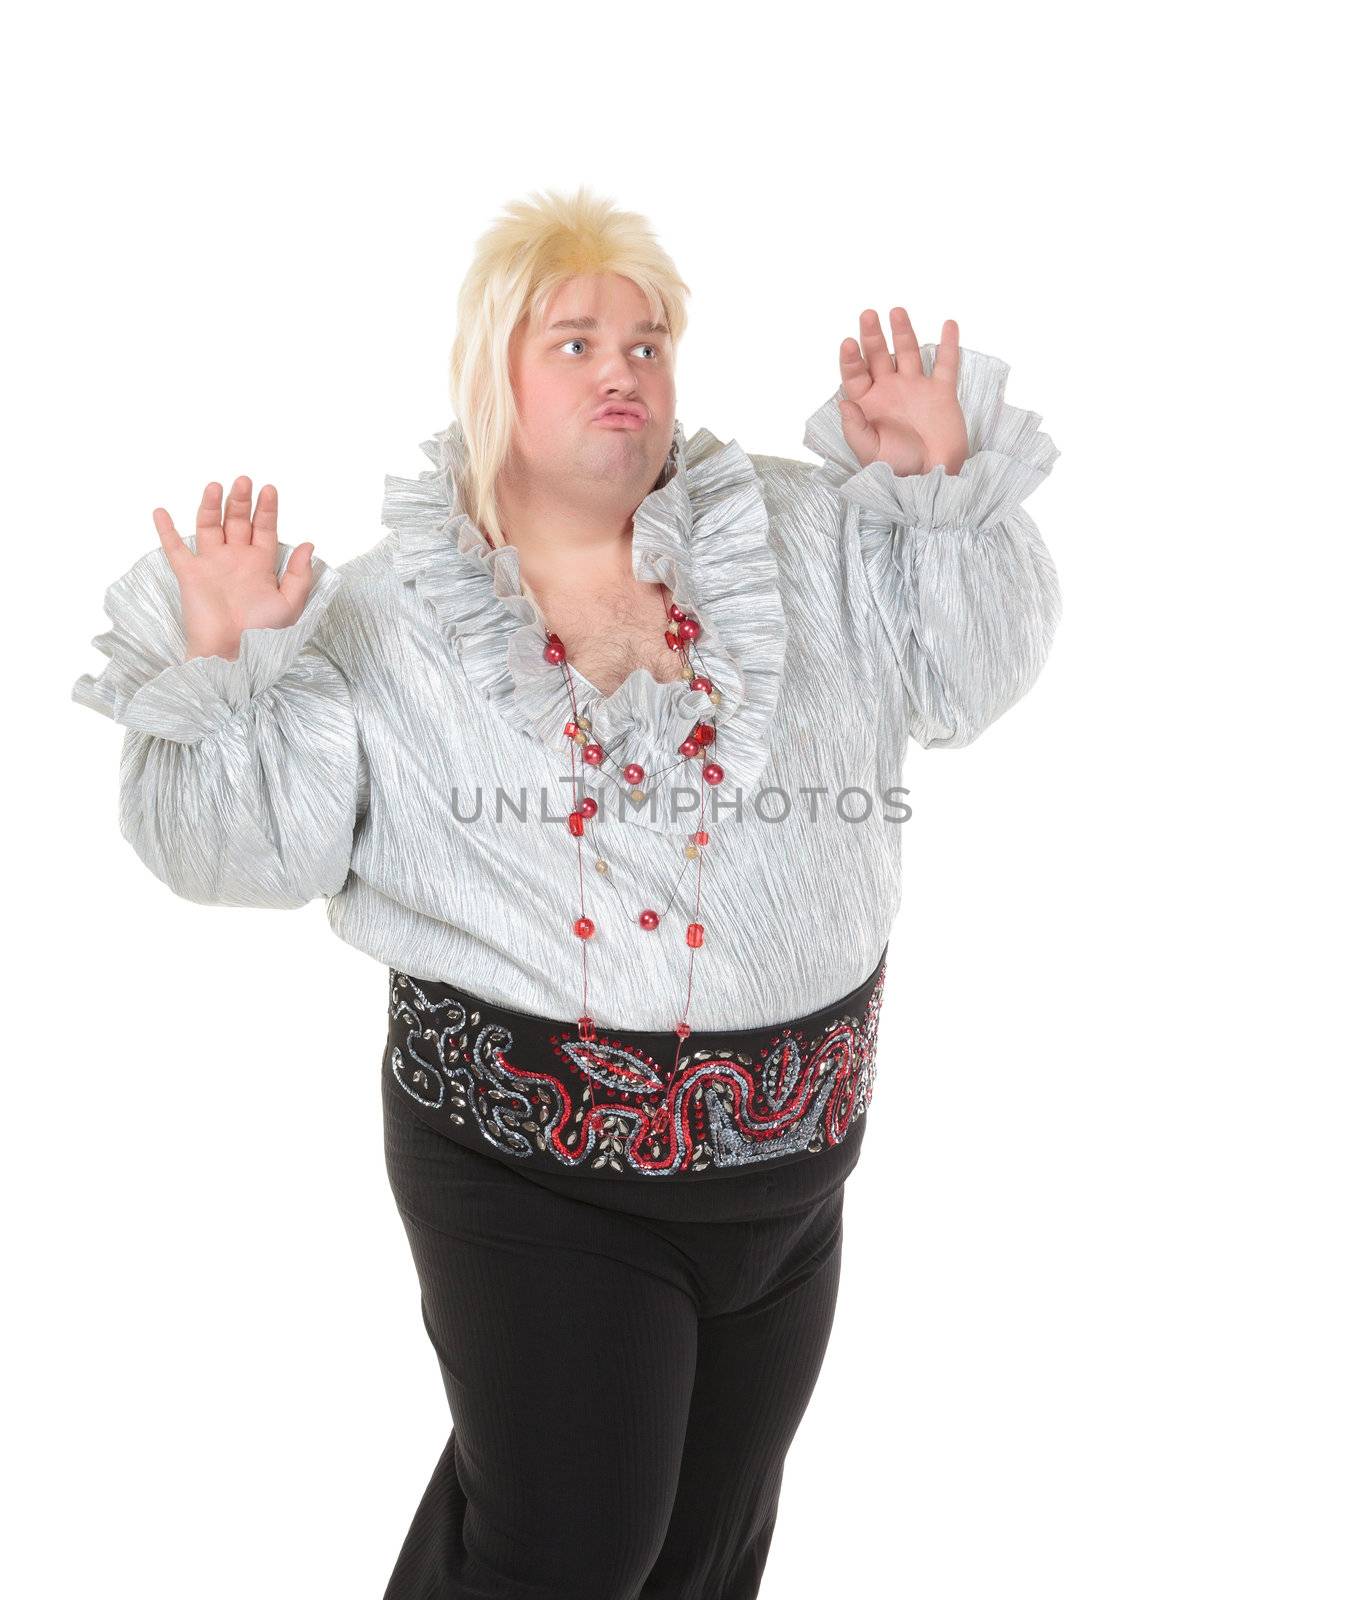 Crazy funny fat man posing wearing a blonde wig by Discovod